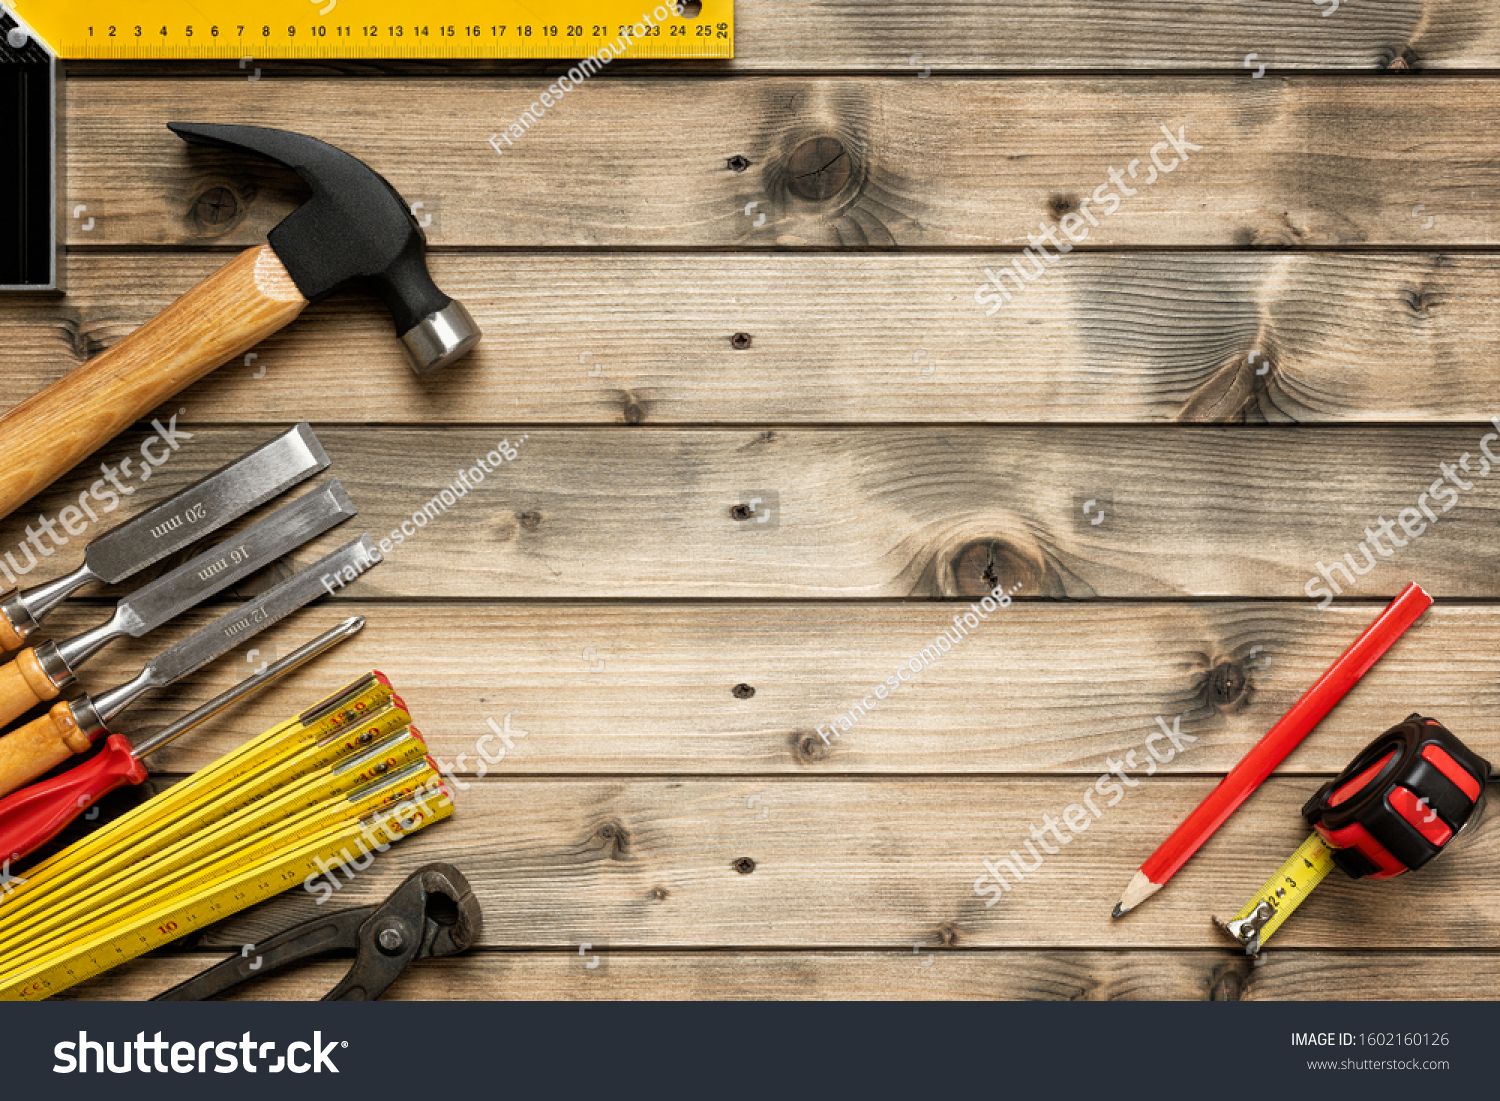 Carpentry Wallpapers